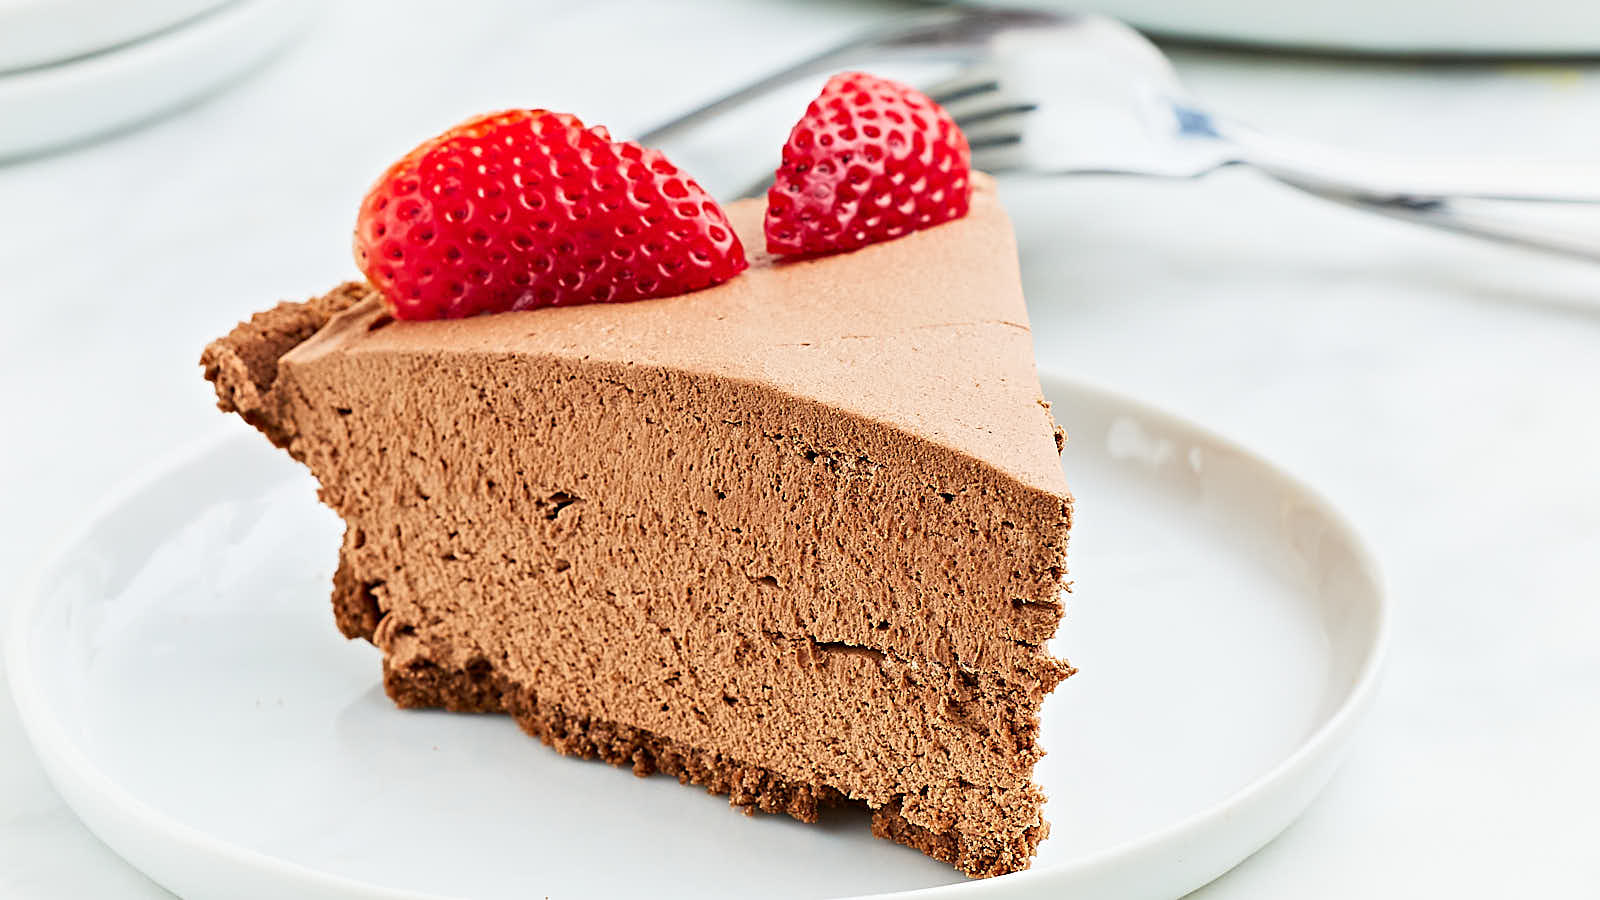 Chocolate Cheesecake recipe by Cheerful Cook.